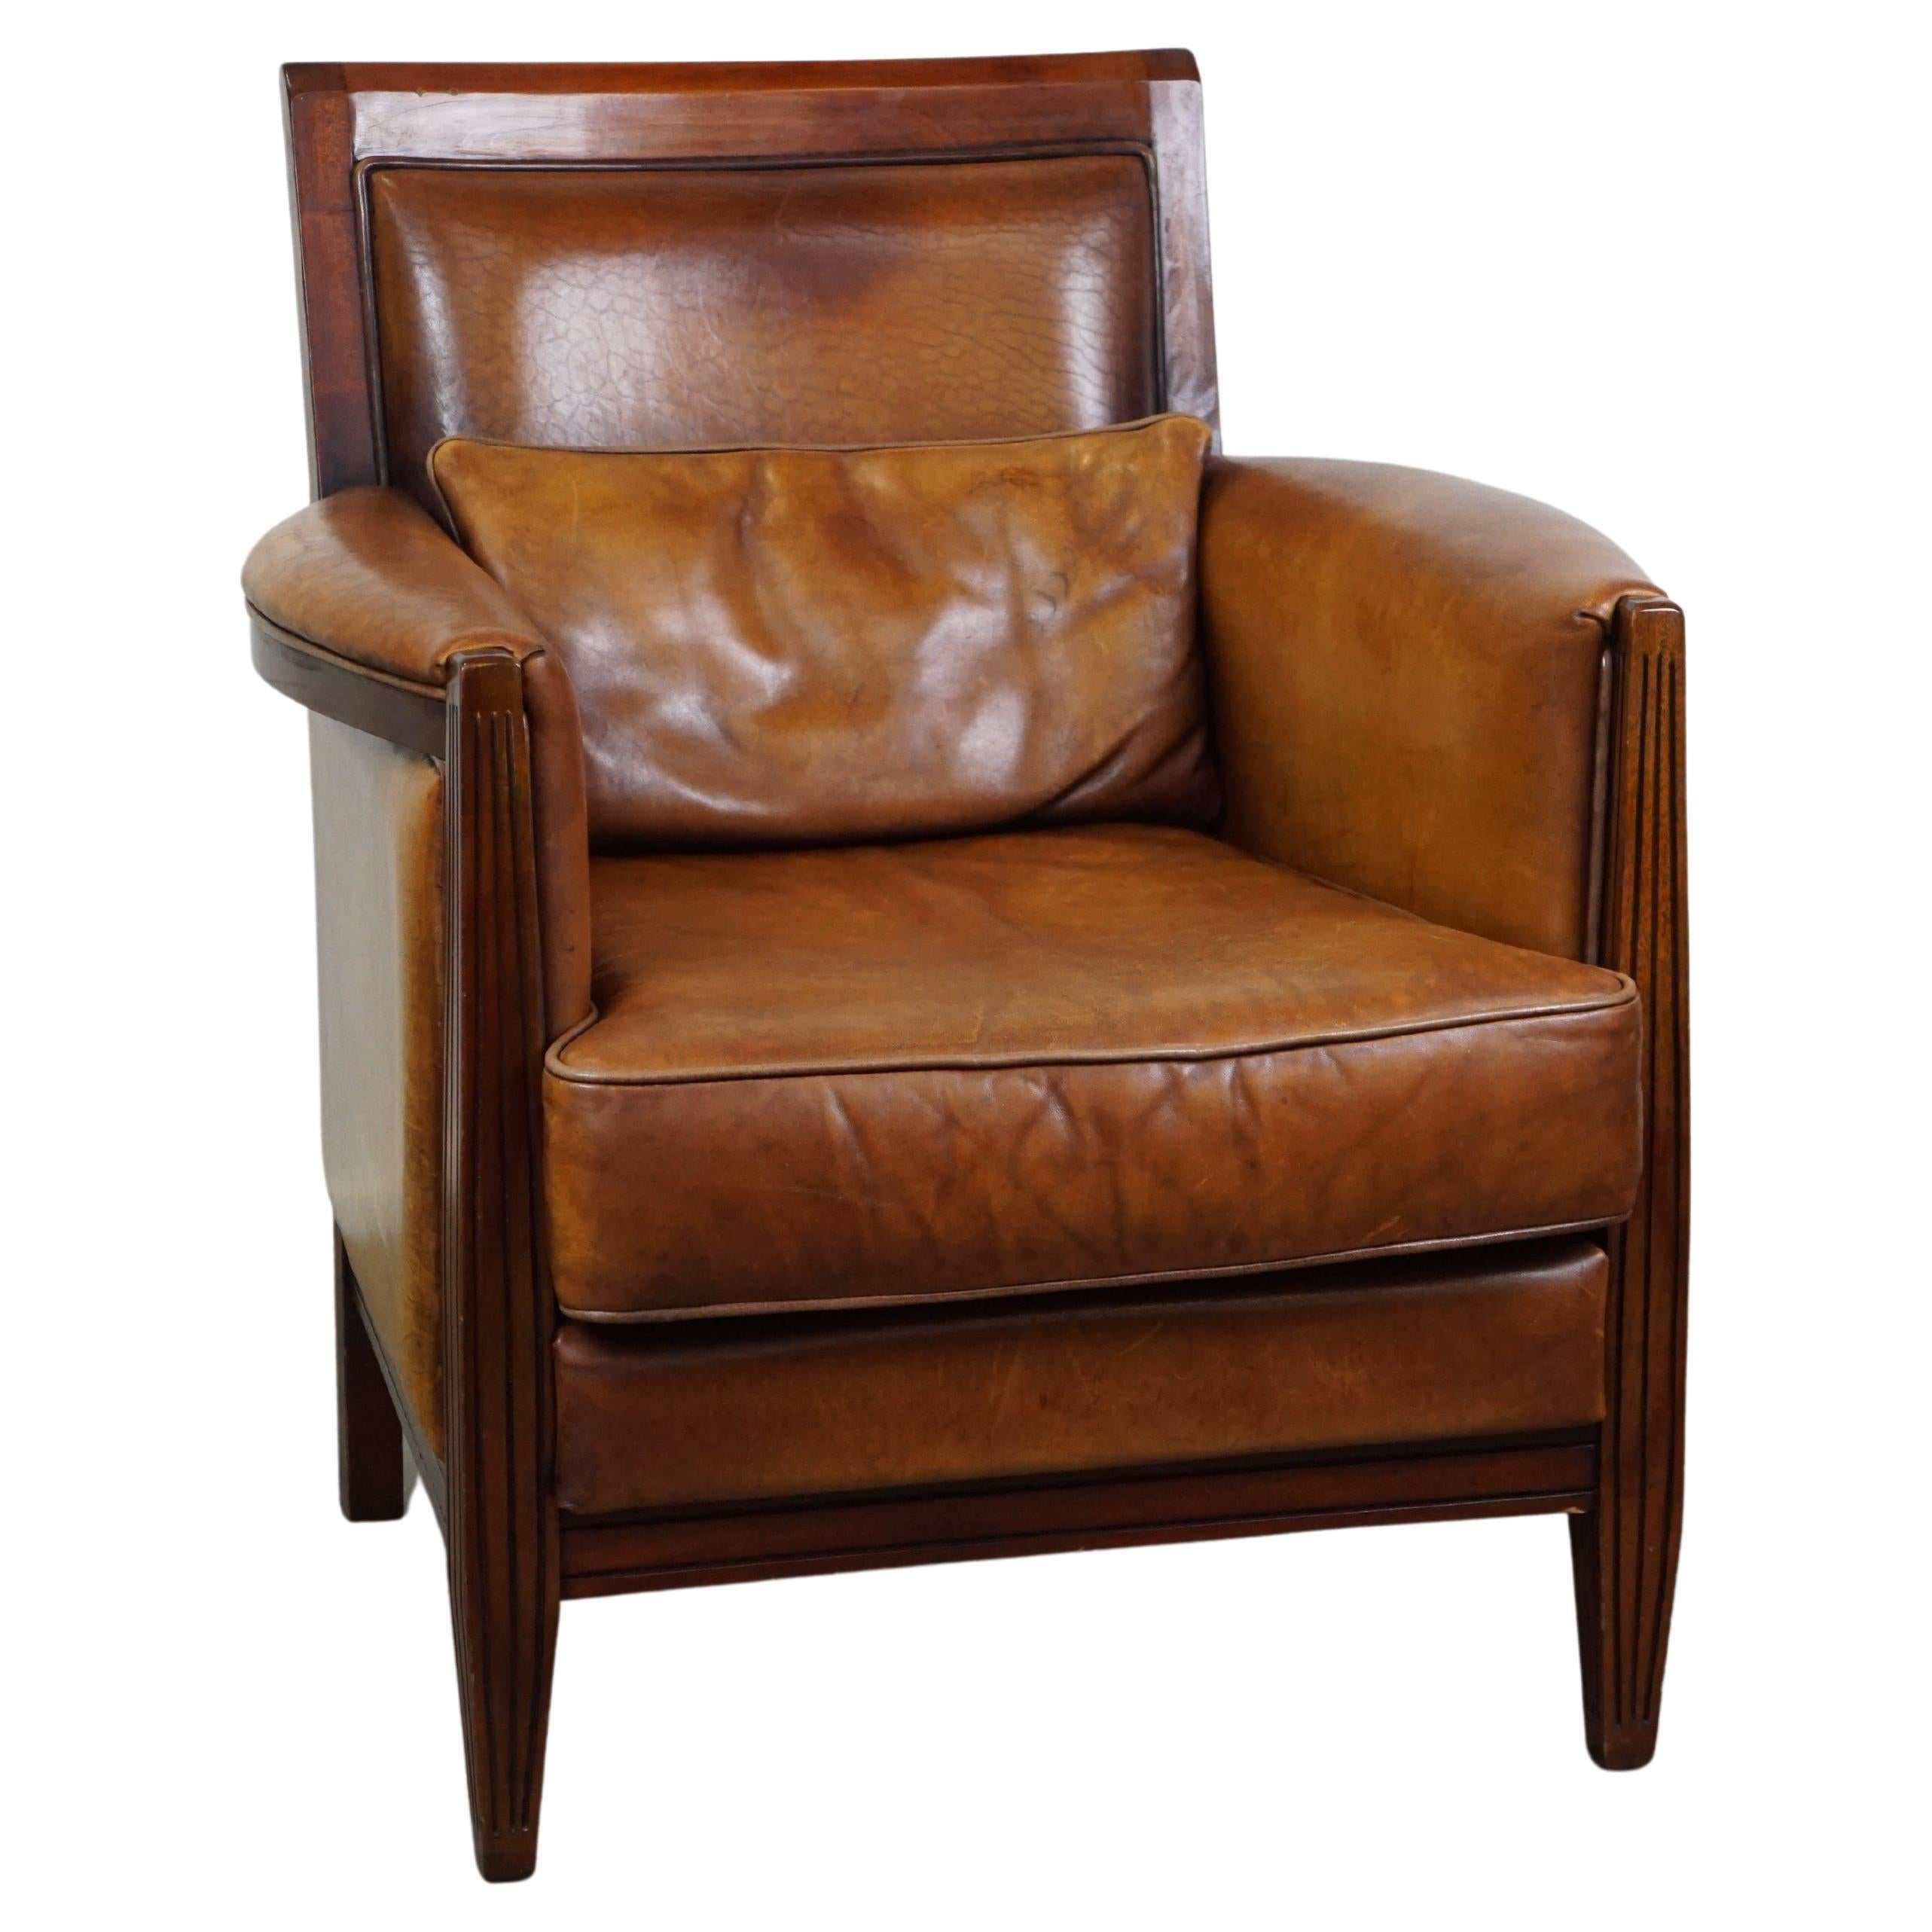 Sheep leather Art Deco design armchair with high seating comfort